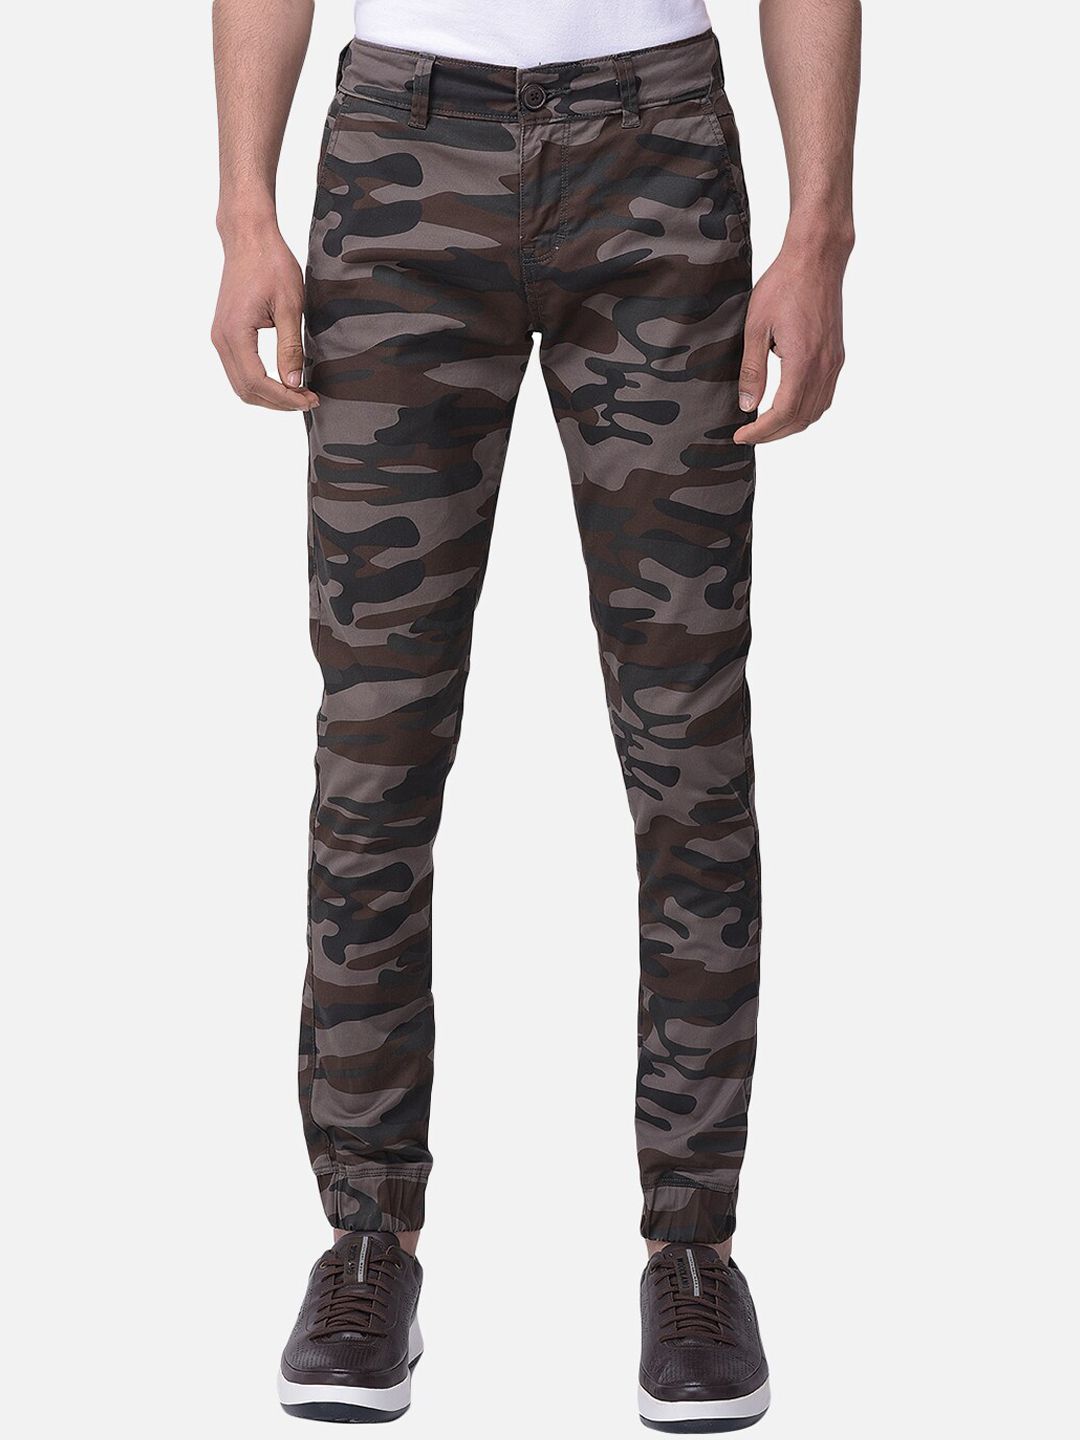 Whistles Woodland Animal Print Cropped Trousers RedMulti at John Lewis   Partners